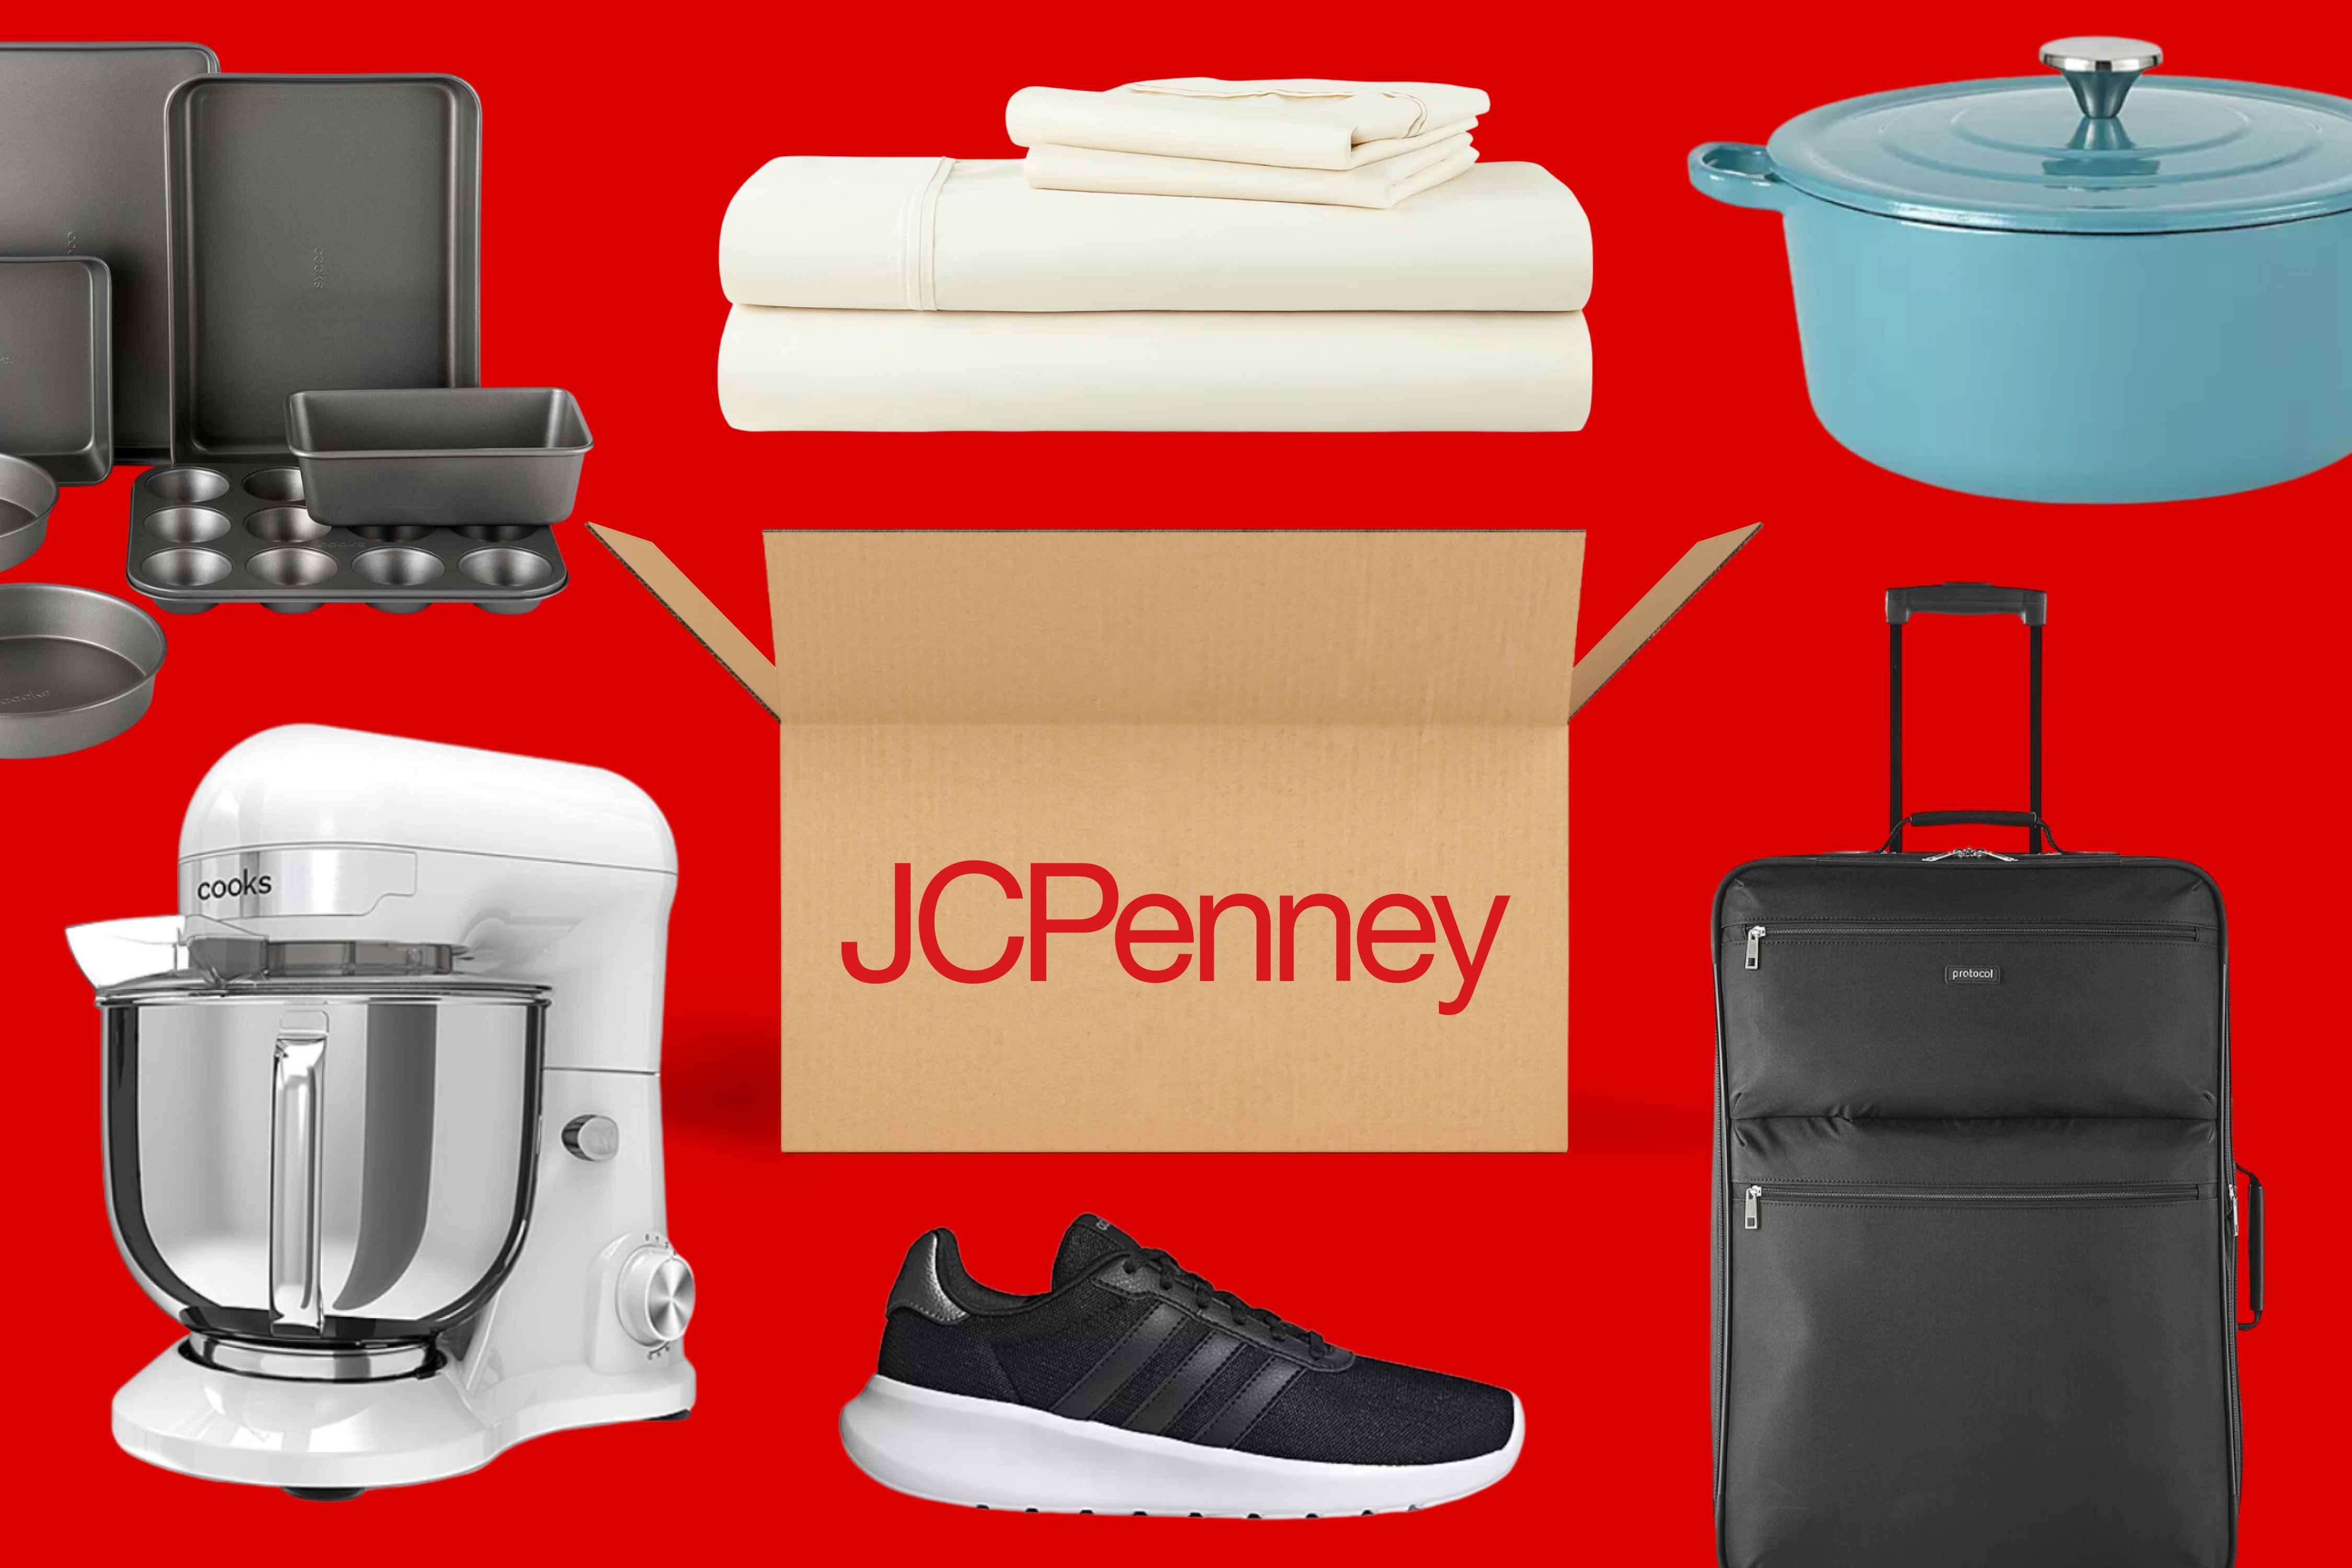 Friends and Family Sale at JCPenney: $3.49 Towels, $30 Adidas, and More